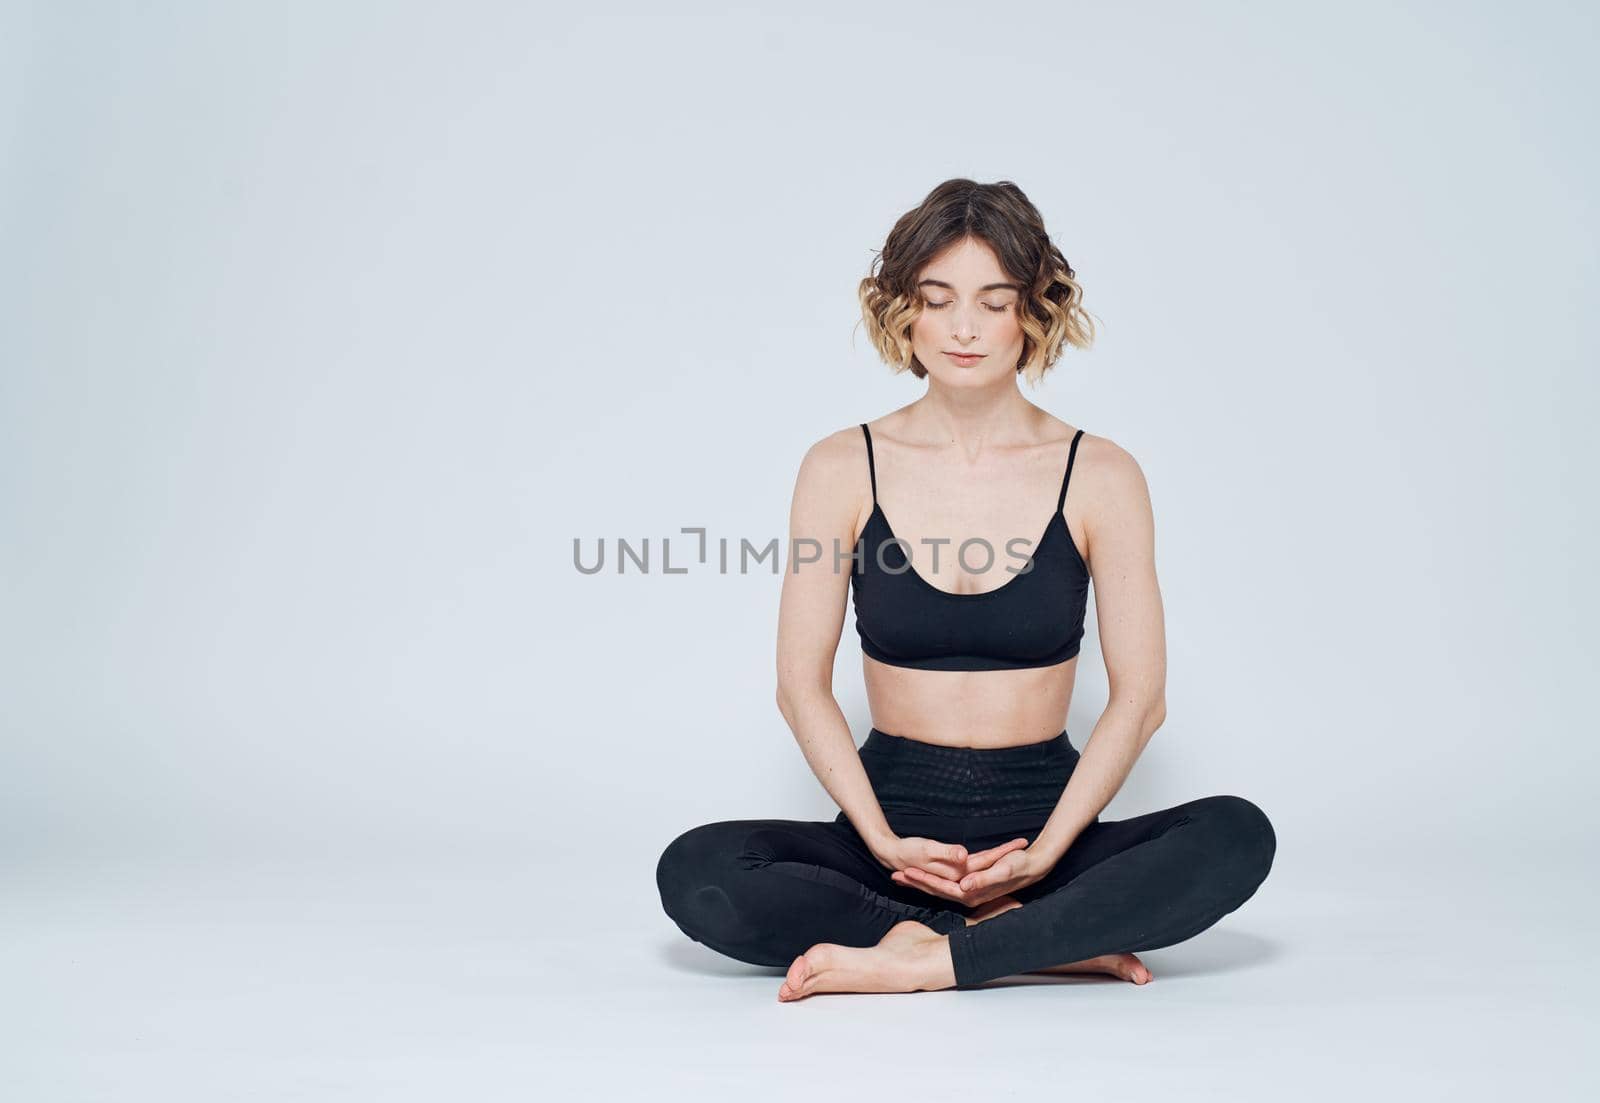 A woman is meditating on a light background with her legs crossed on the floor by SHOTPRIME